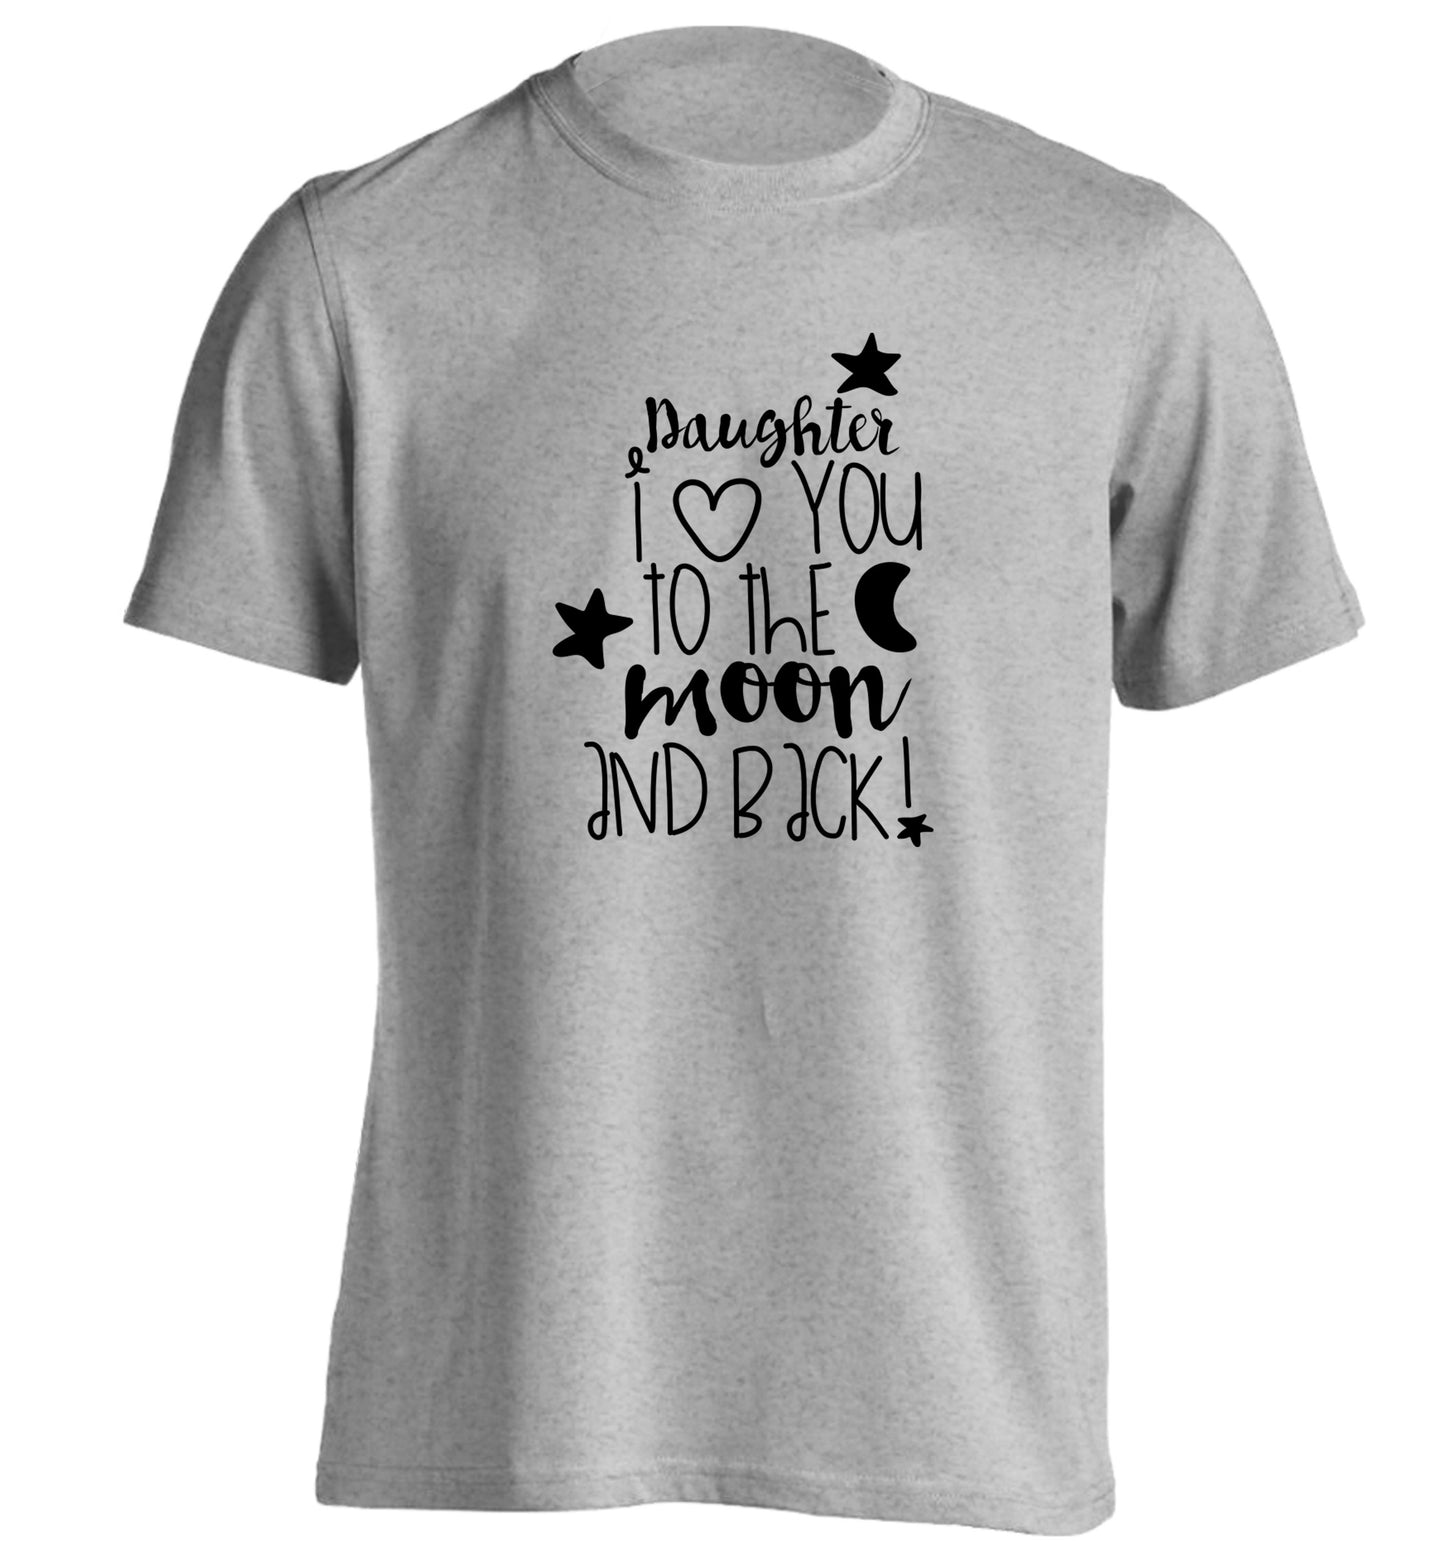 Daughter I love you to the moon and back adults unisex grey Tshirt 2XL